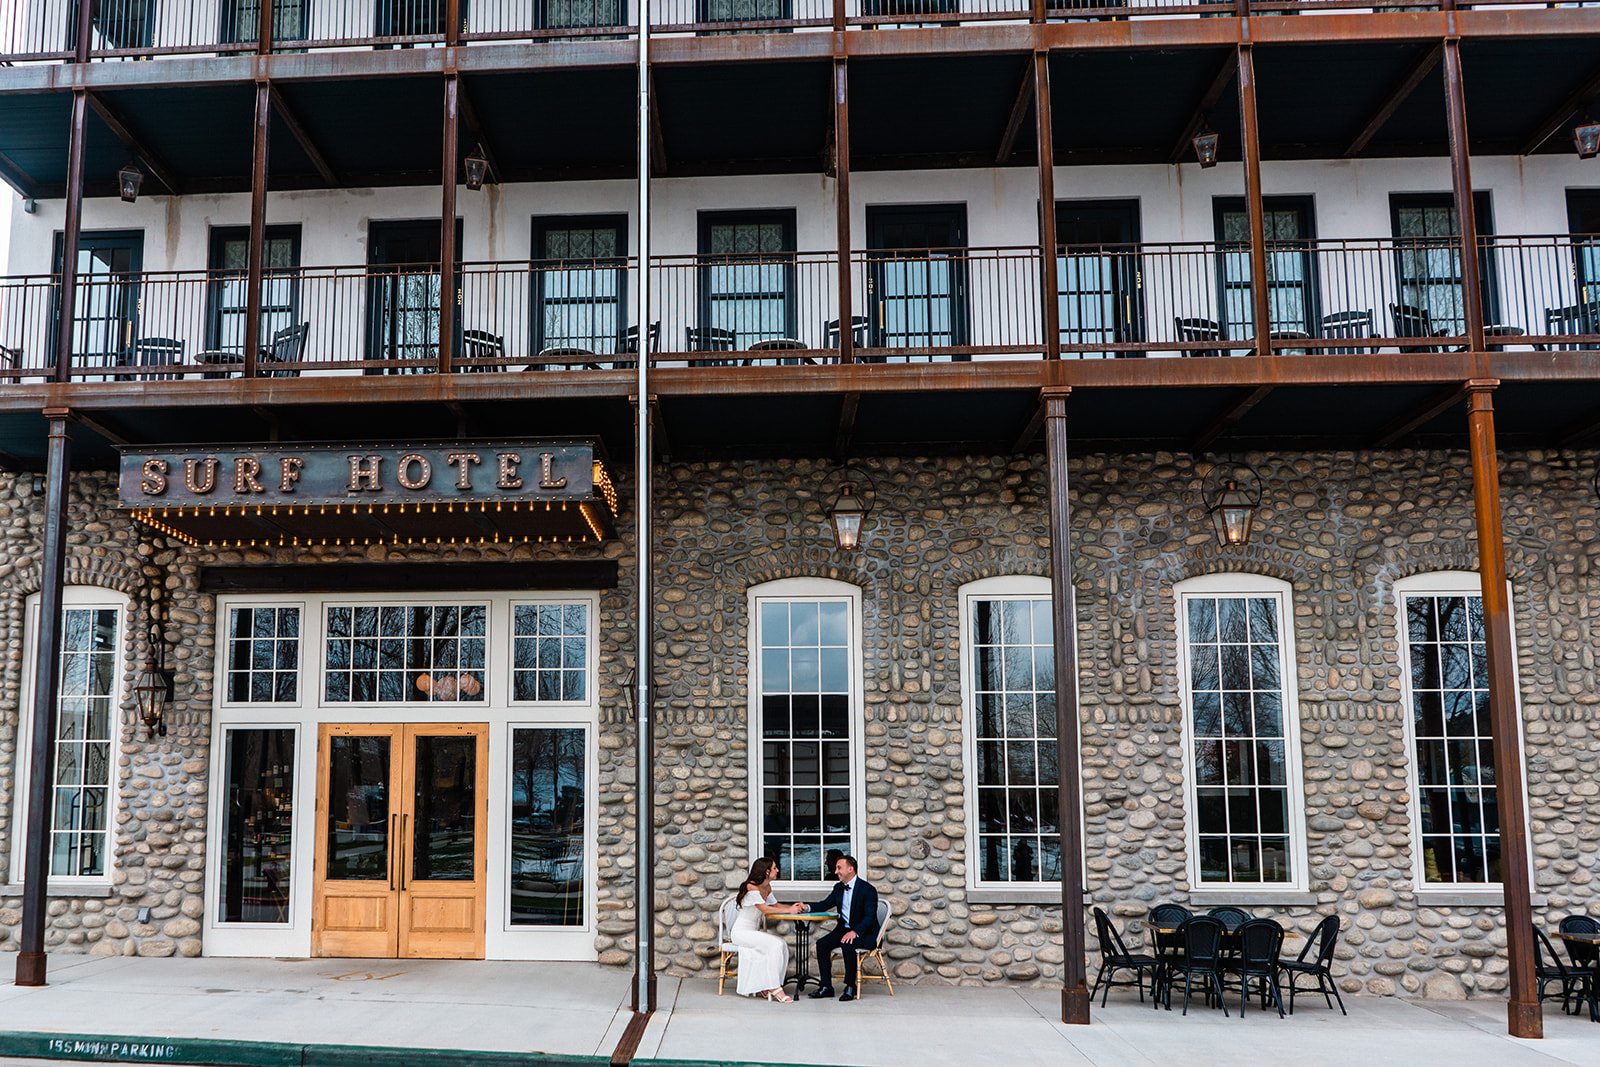 A couple sitting and chatting in front of the Surf Hotel, characterized by its grey stone facade and multiple balconies, during their Buena Vista elopement.